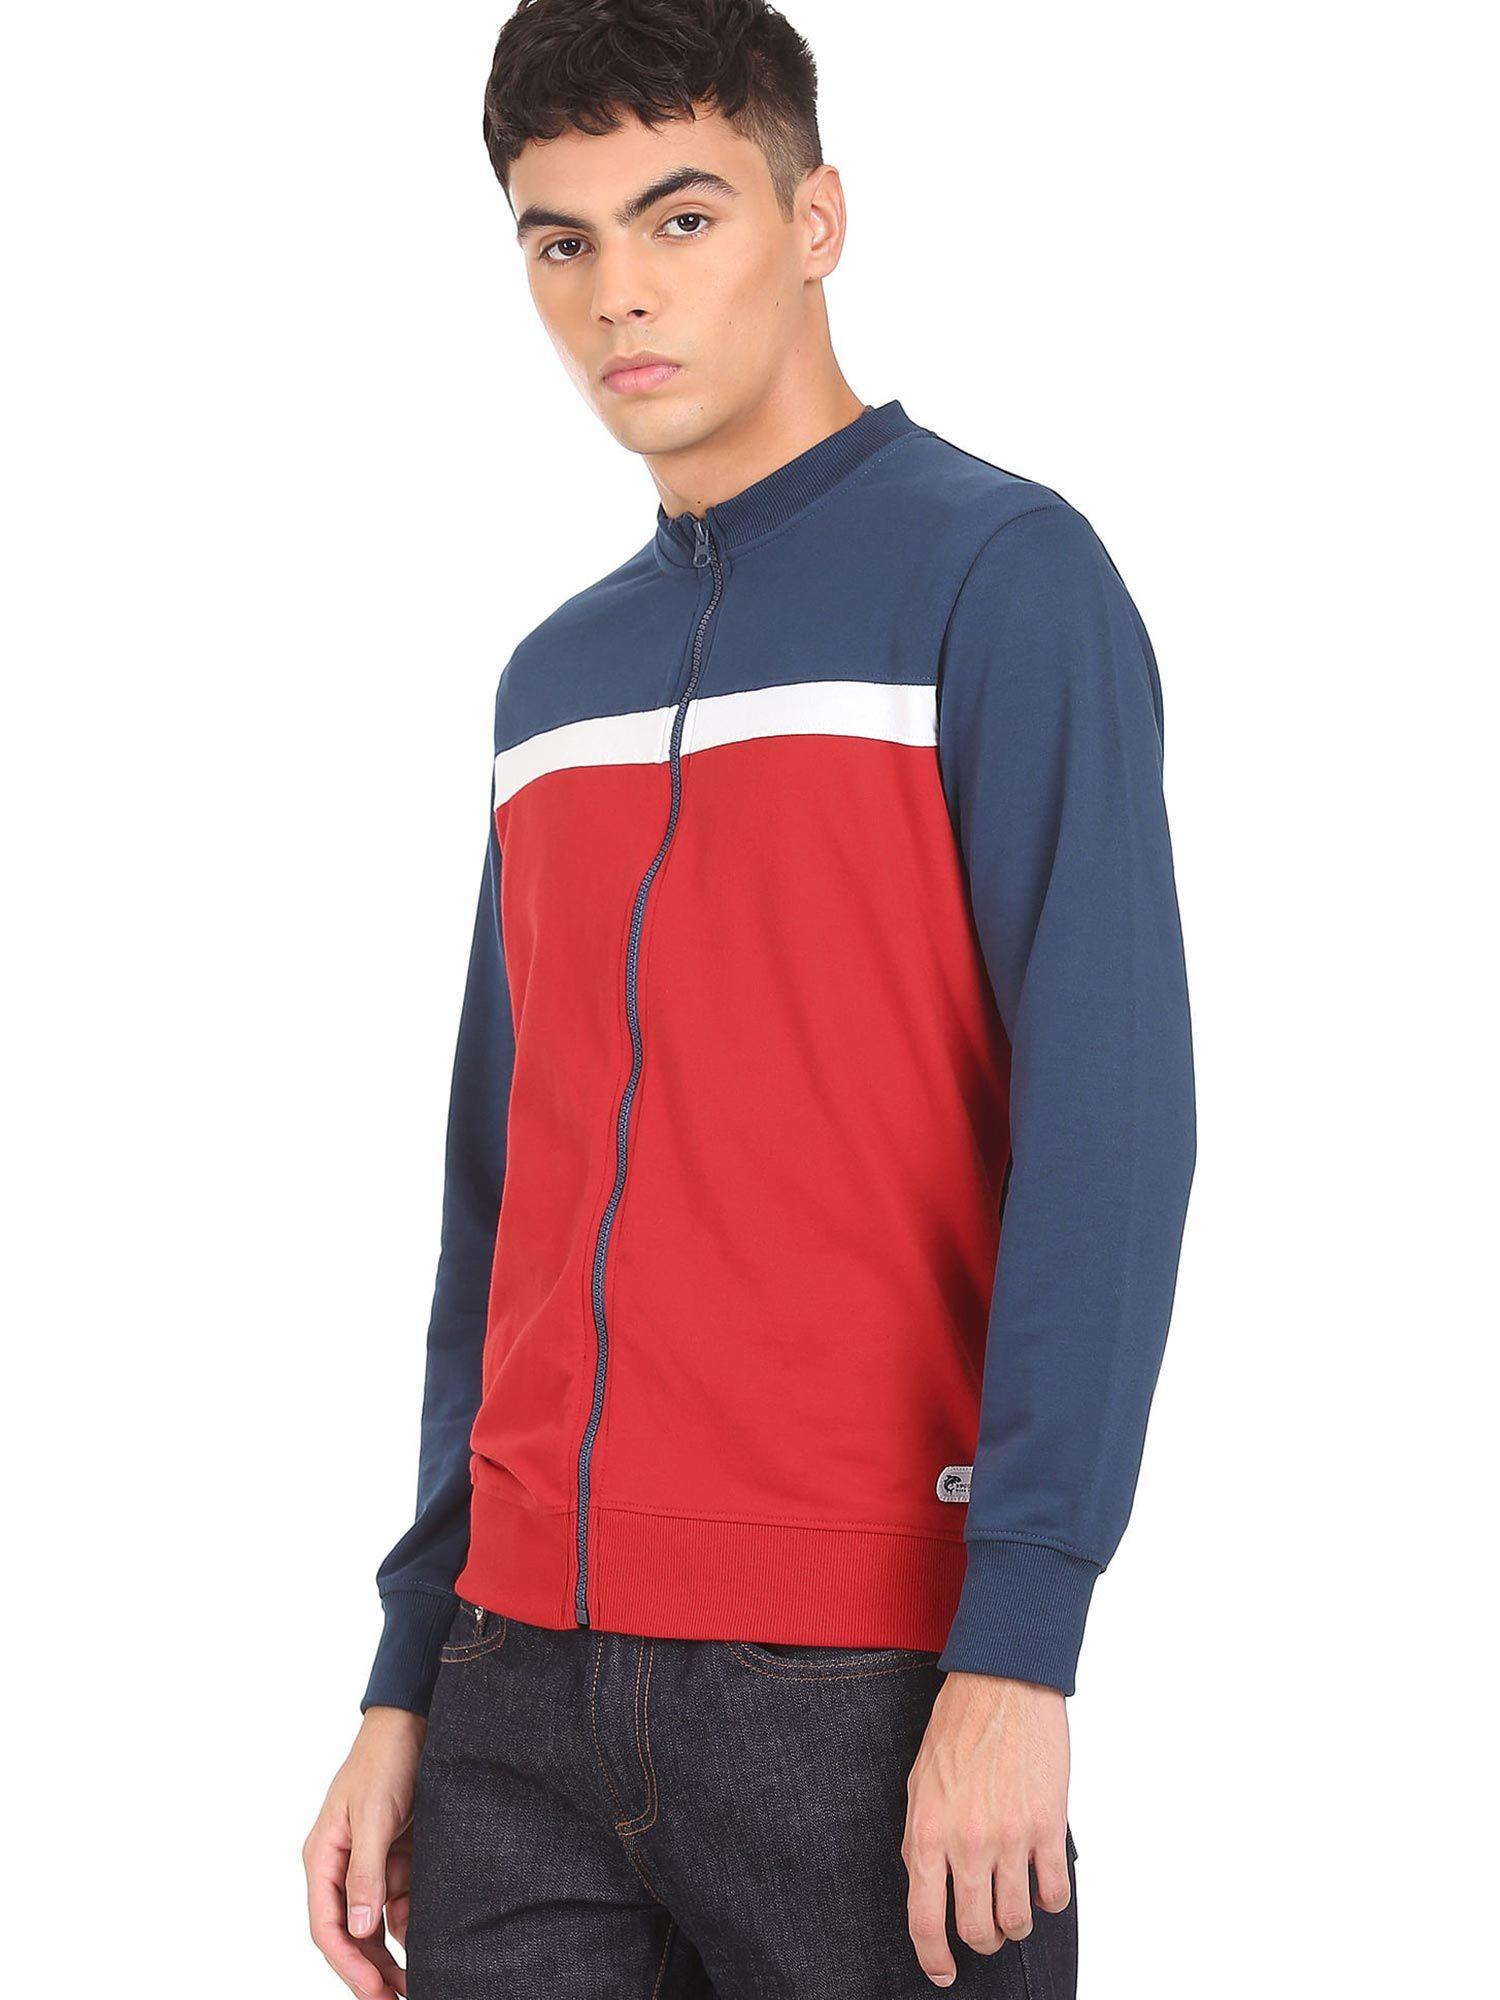 Men Navy and Red Long Sleeve Colour Blocked Sweatshirt